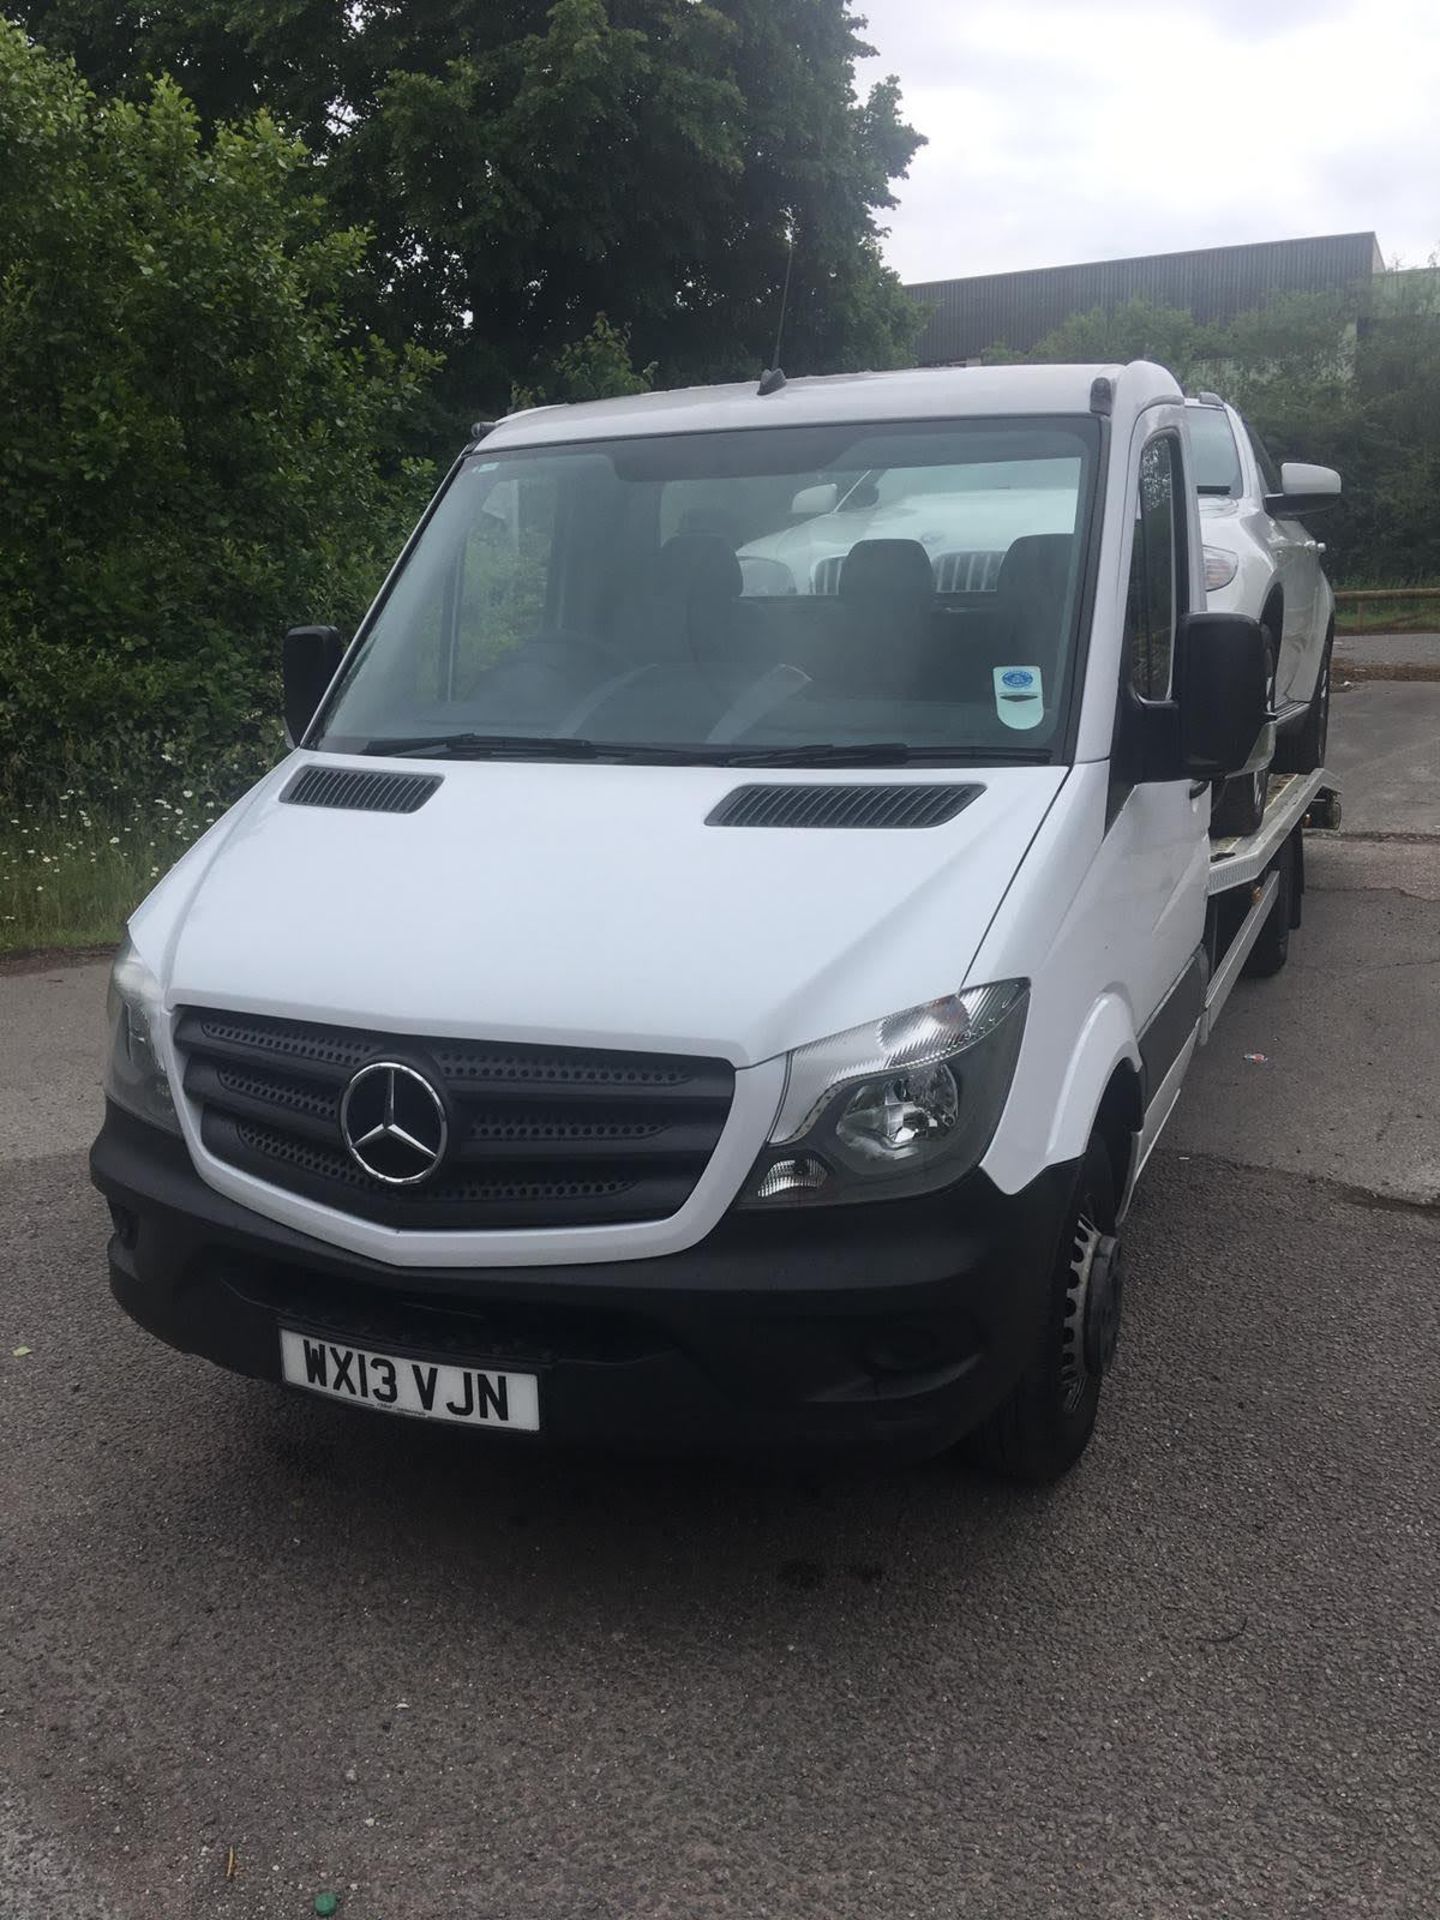 VERY RARE! 2013/13 REG MERCEDES-BENZ SPRINTER 519 CDI 3.0 DIESEL WHITE RECOVERY, (BMW NOT INCLUDED) - Image 3 of 24